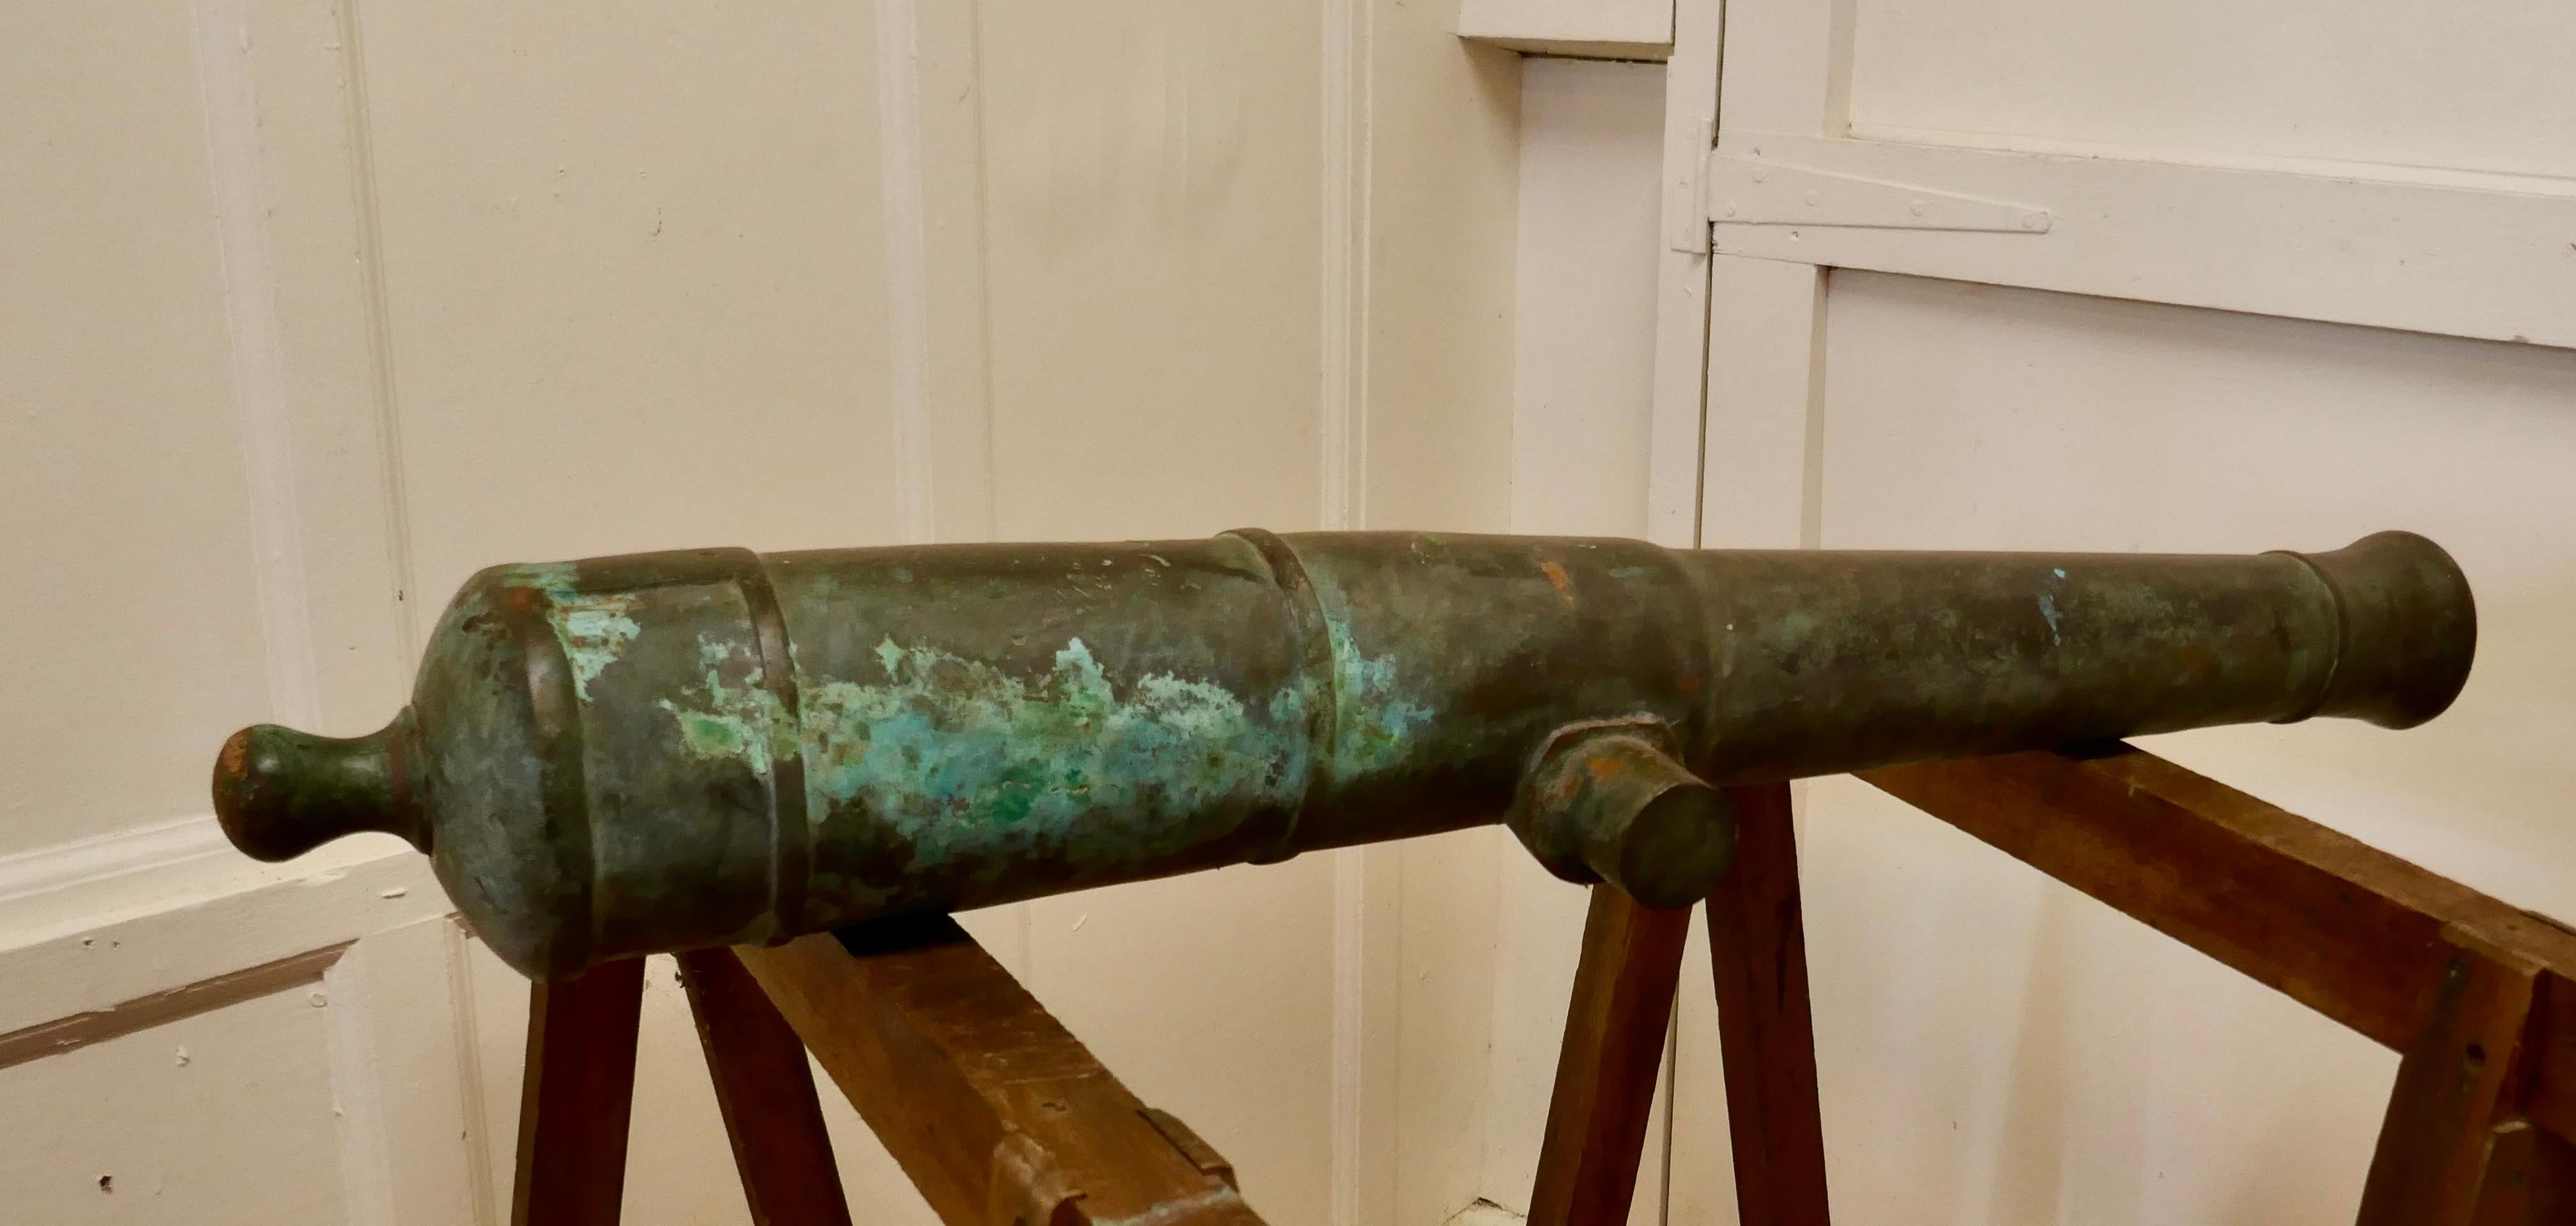 19th century bronze cannon

This wonderful piece is heavy and in sound condition with considerable verdigris patination, I think it may have been rescued from the sea bed, there are no identification markings visible 
The cannon is 40” long and